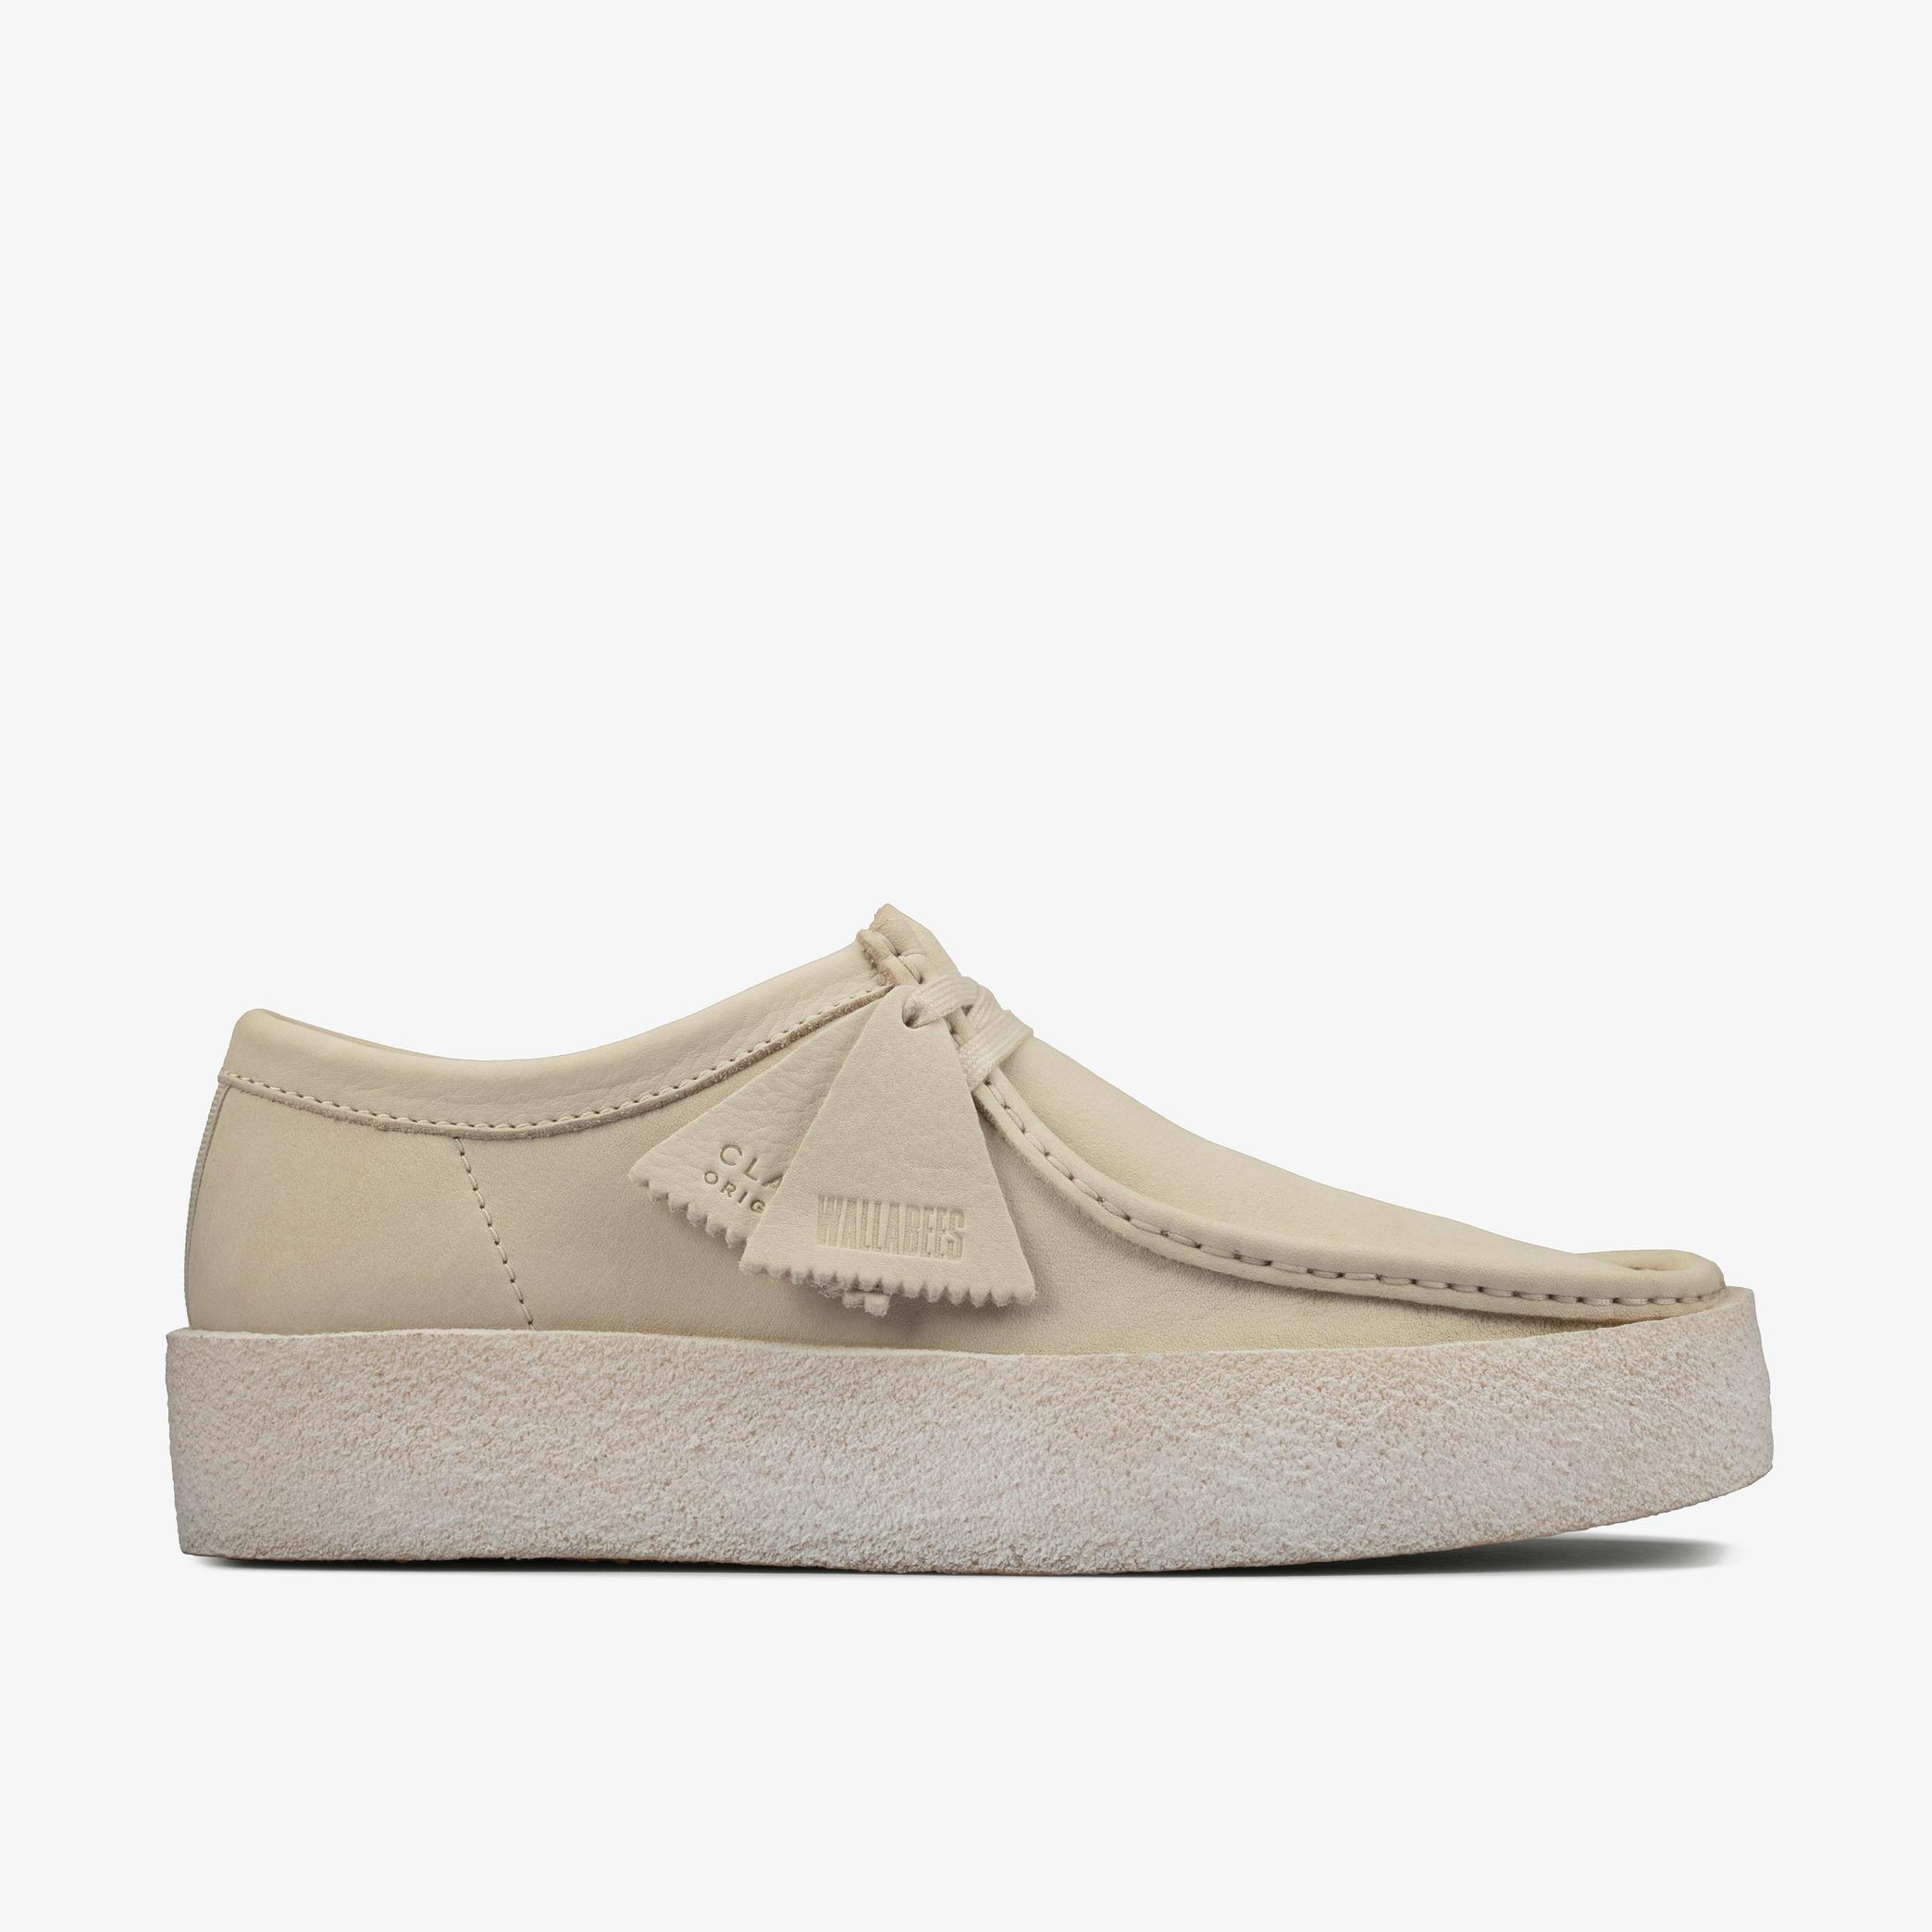 Wallabee Cup White Nubuck Wallabee, view 1 of 7